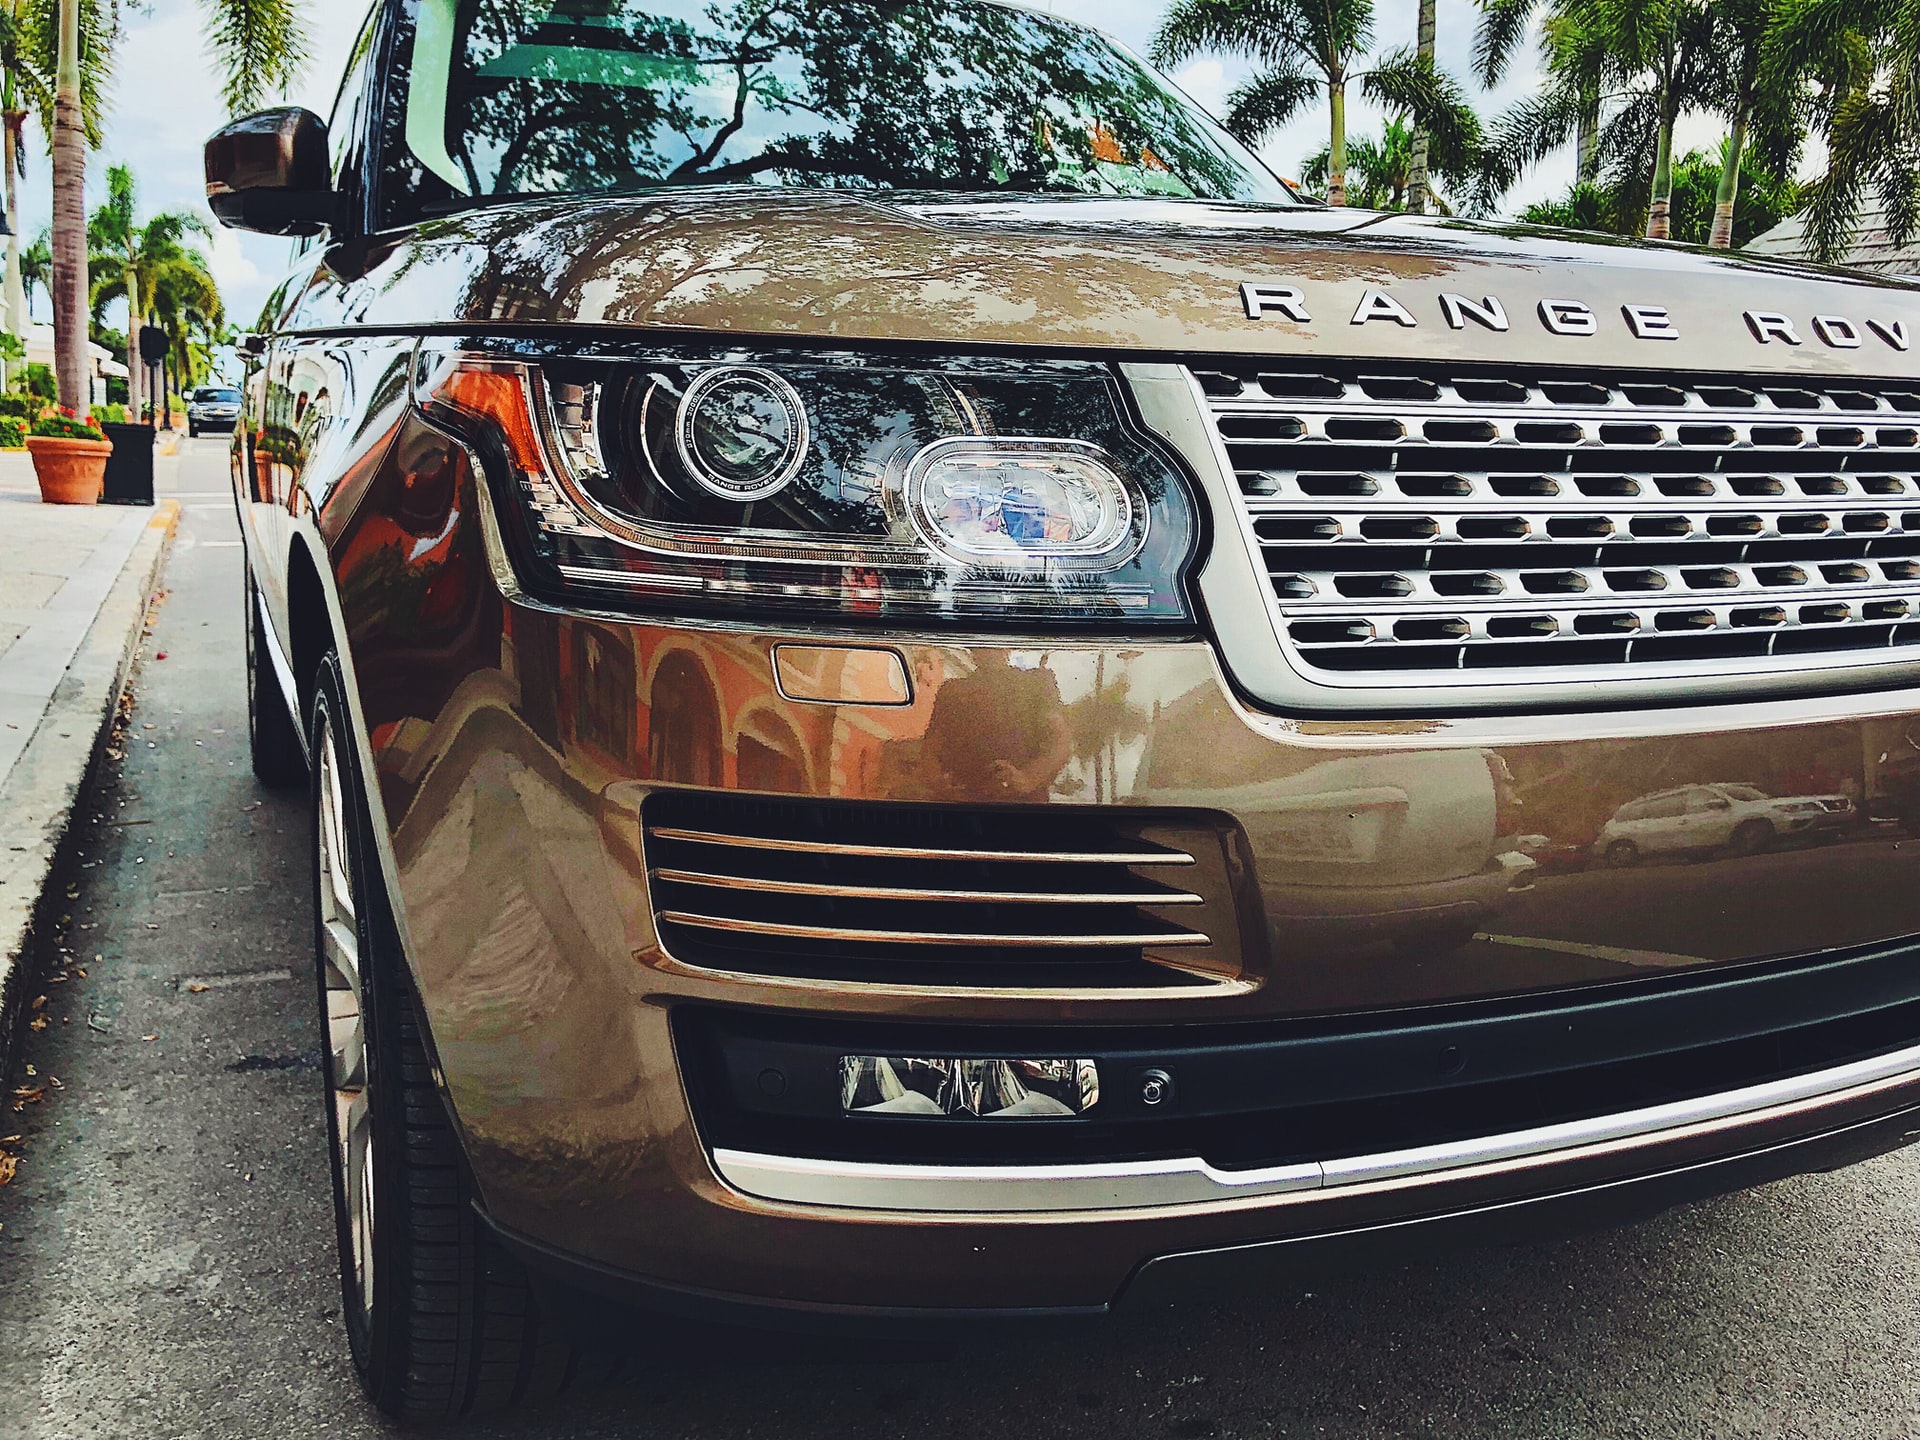 Range Rover and Land Rover